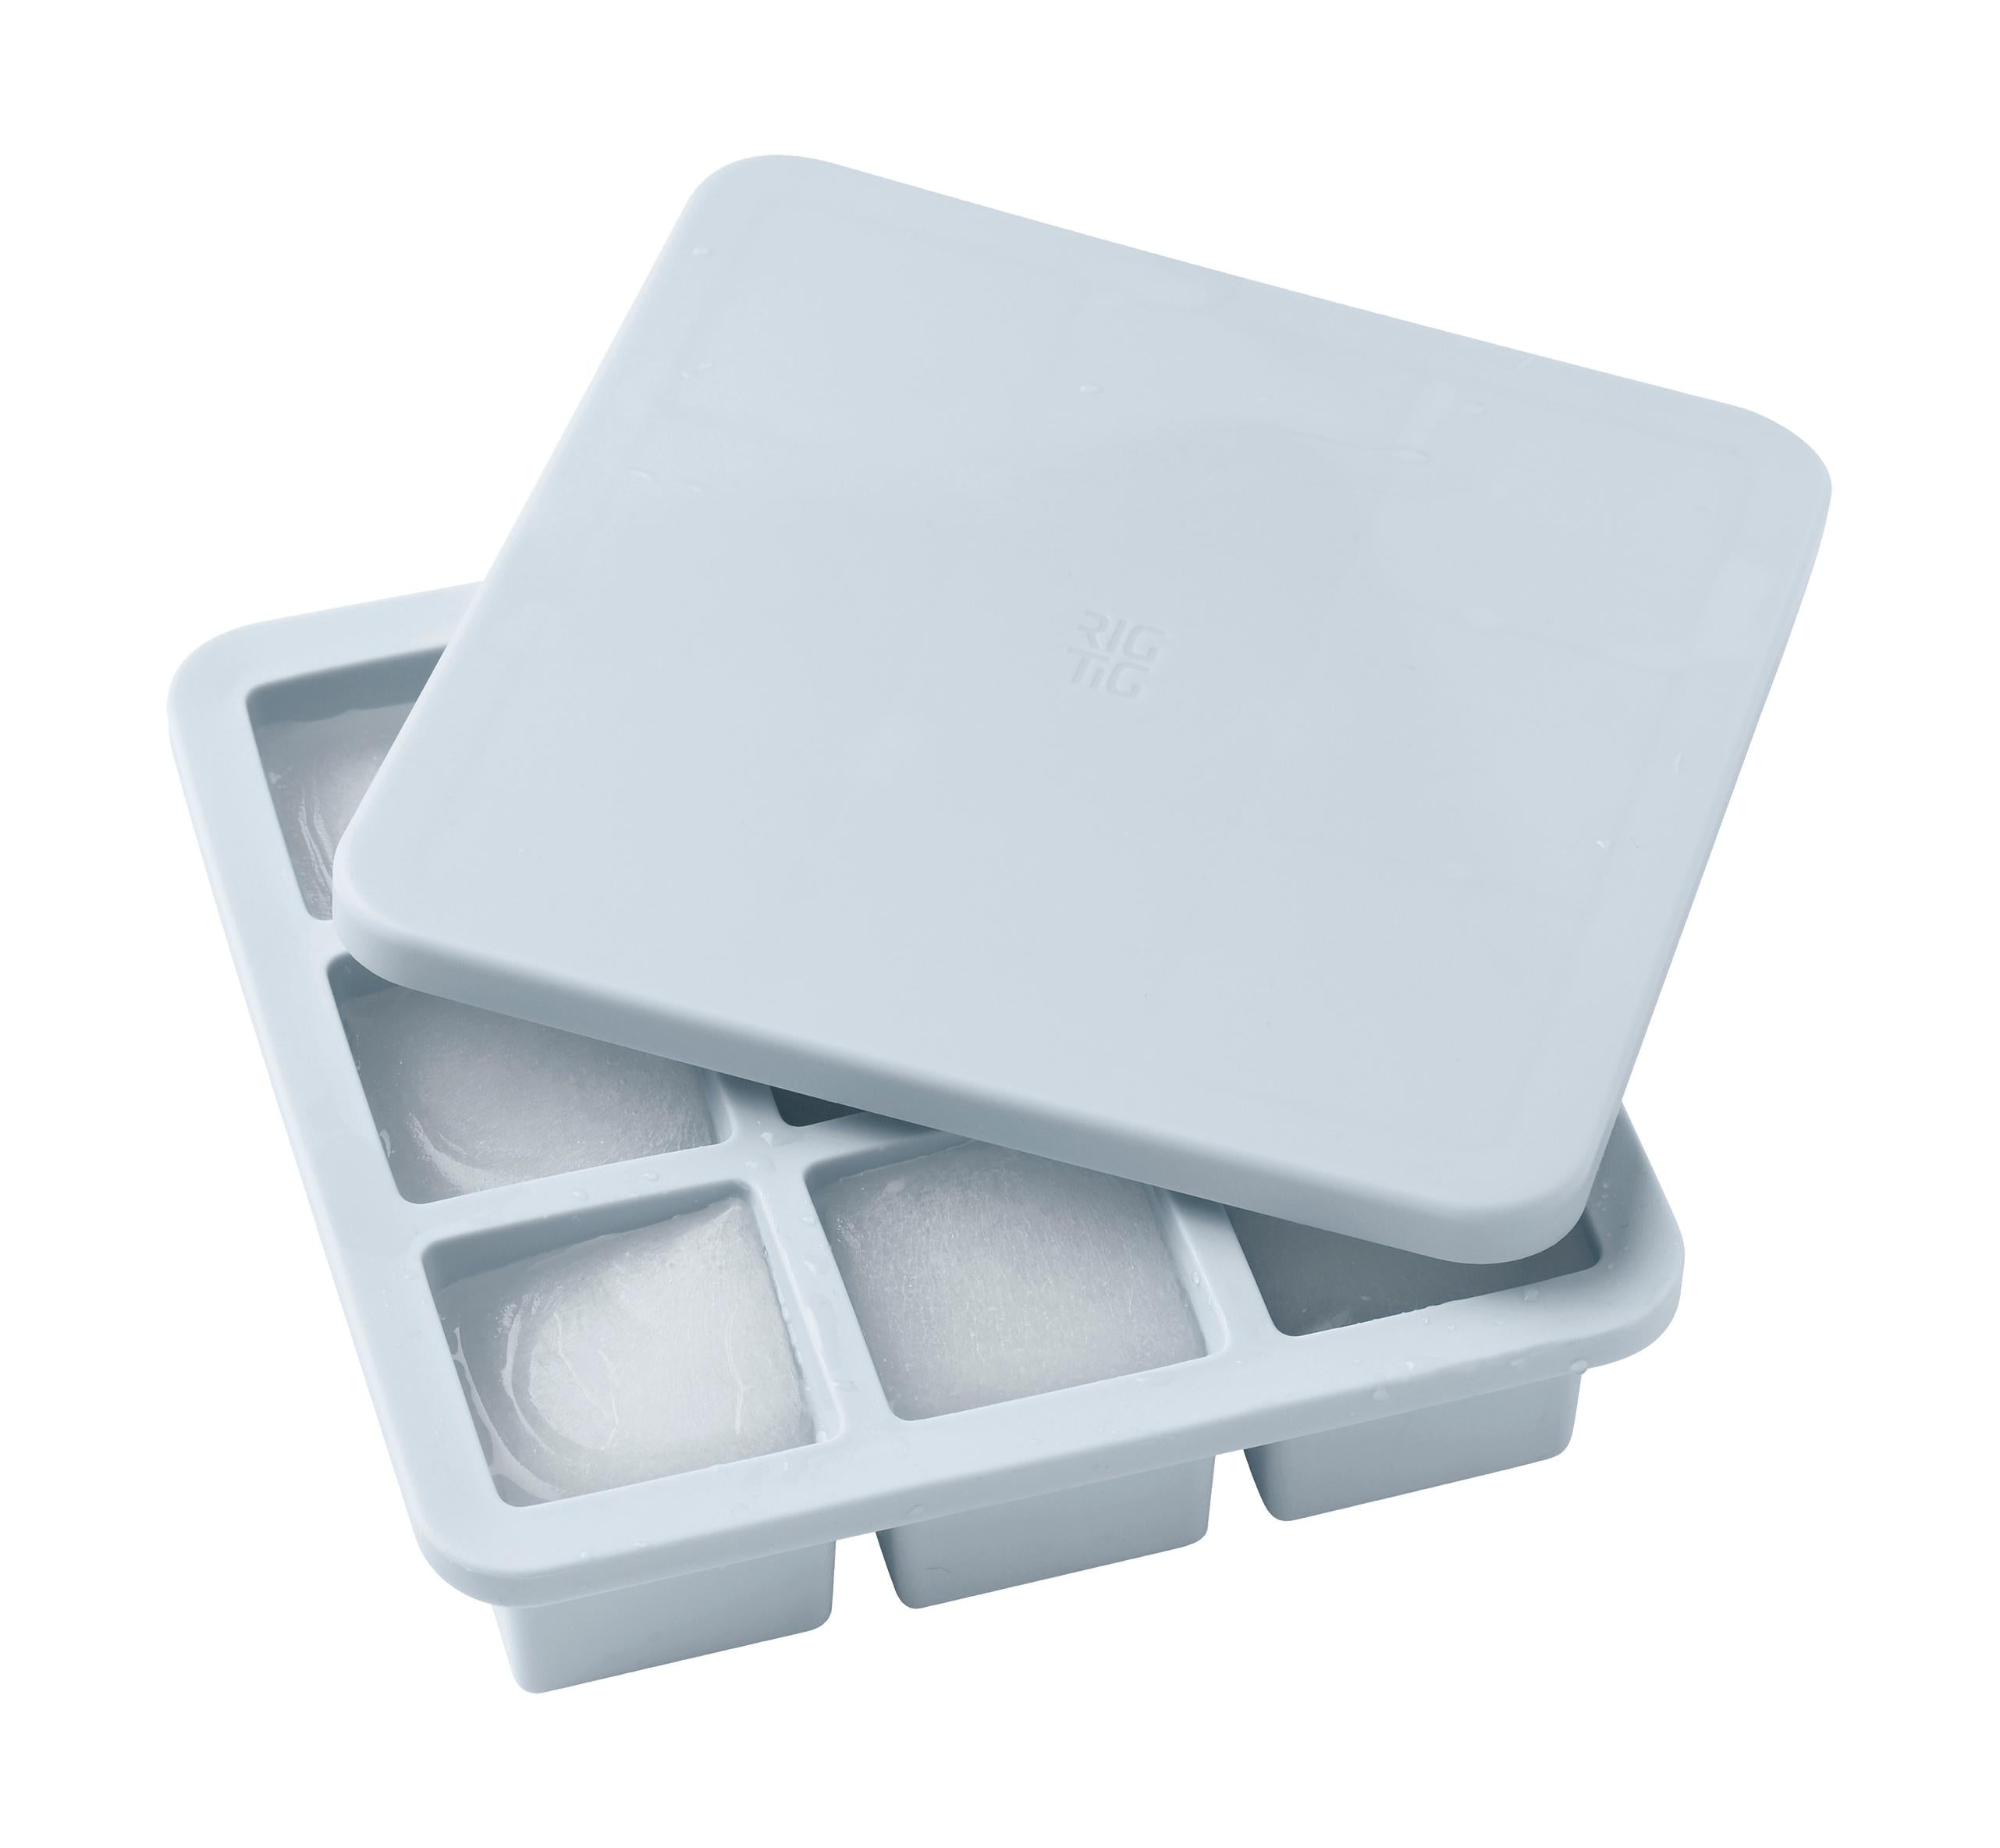 Rig Tig Freeze It Ice Cube Box With Lid 5.0 Cm, Light Blue